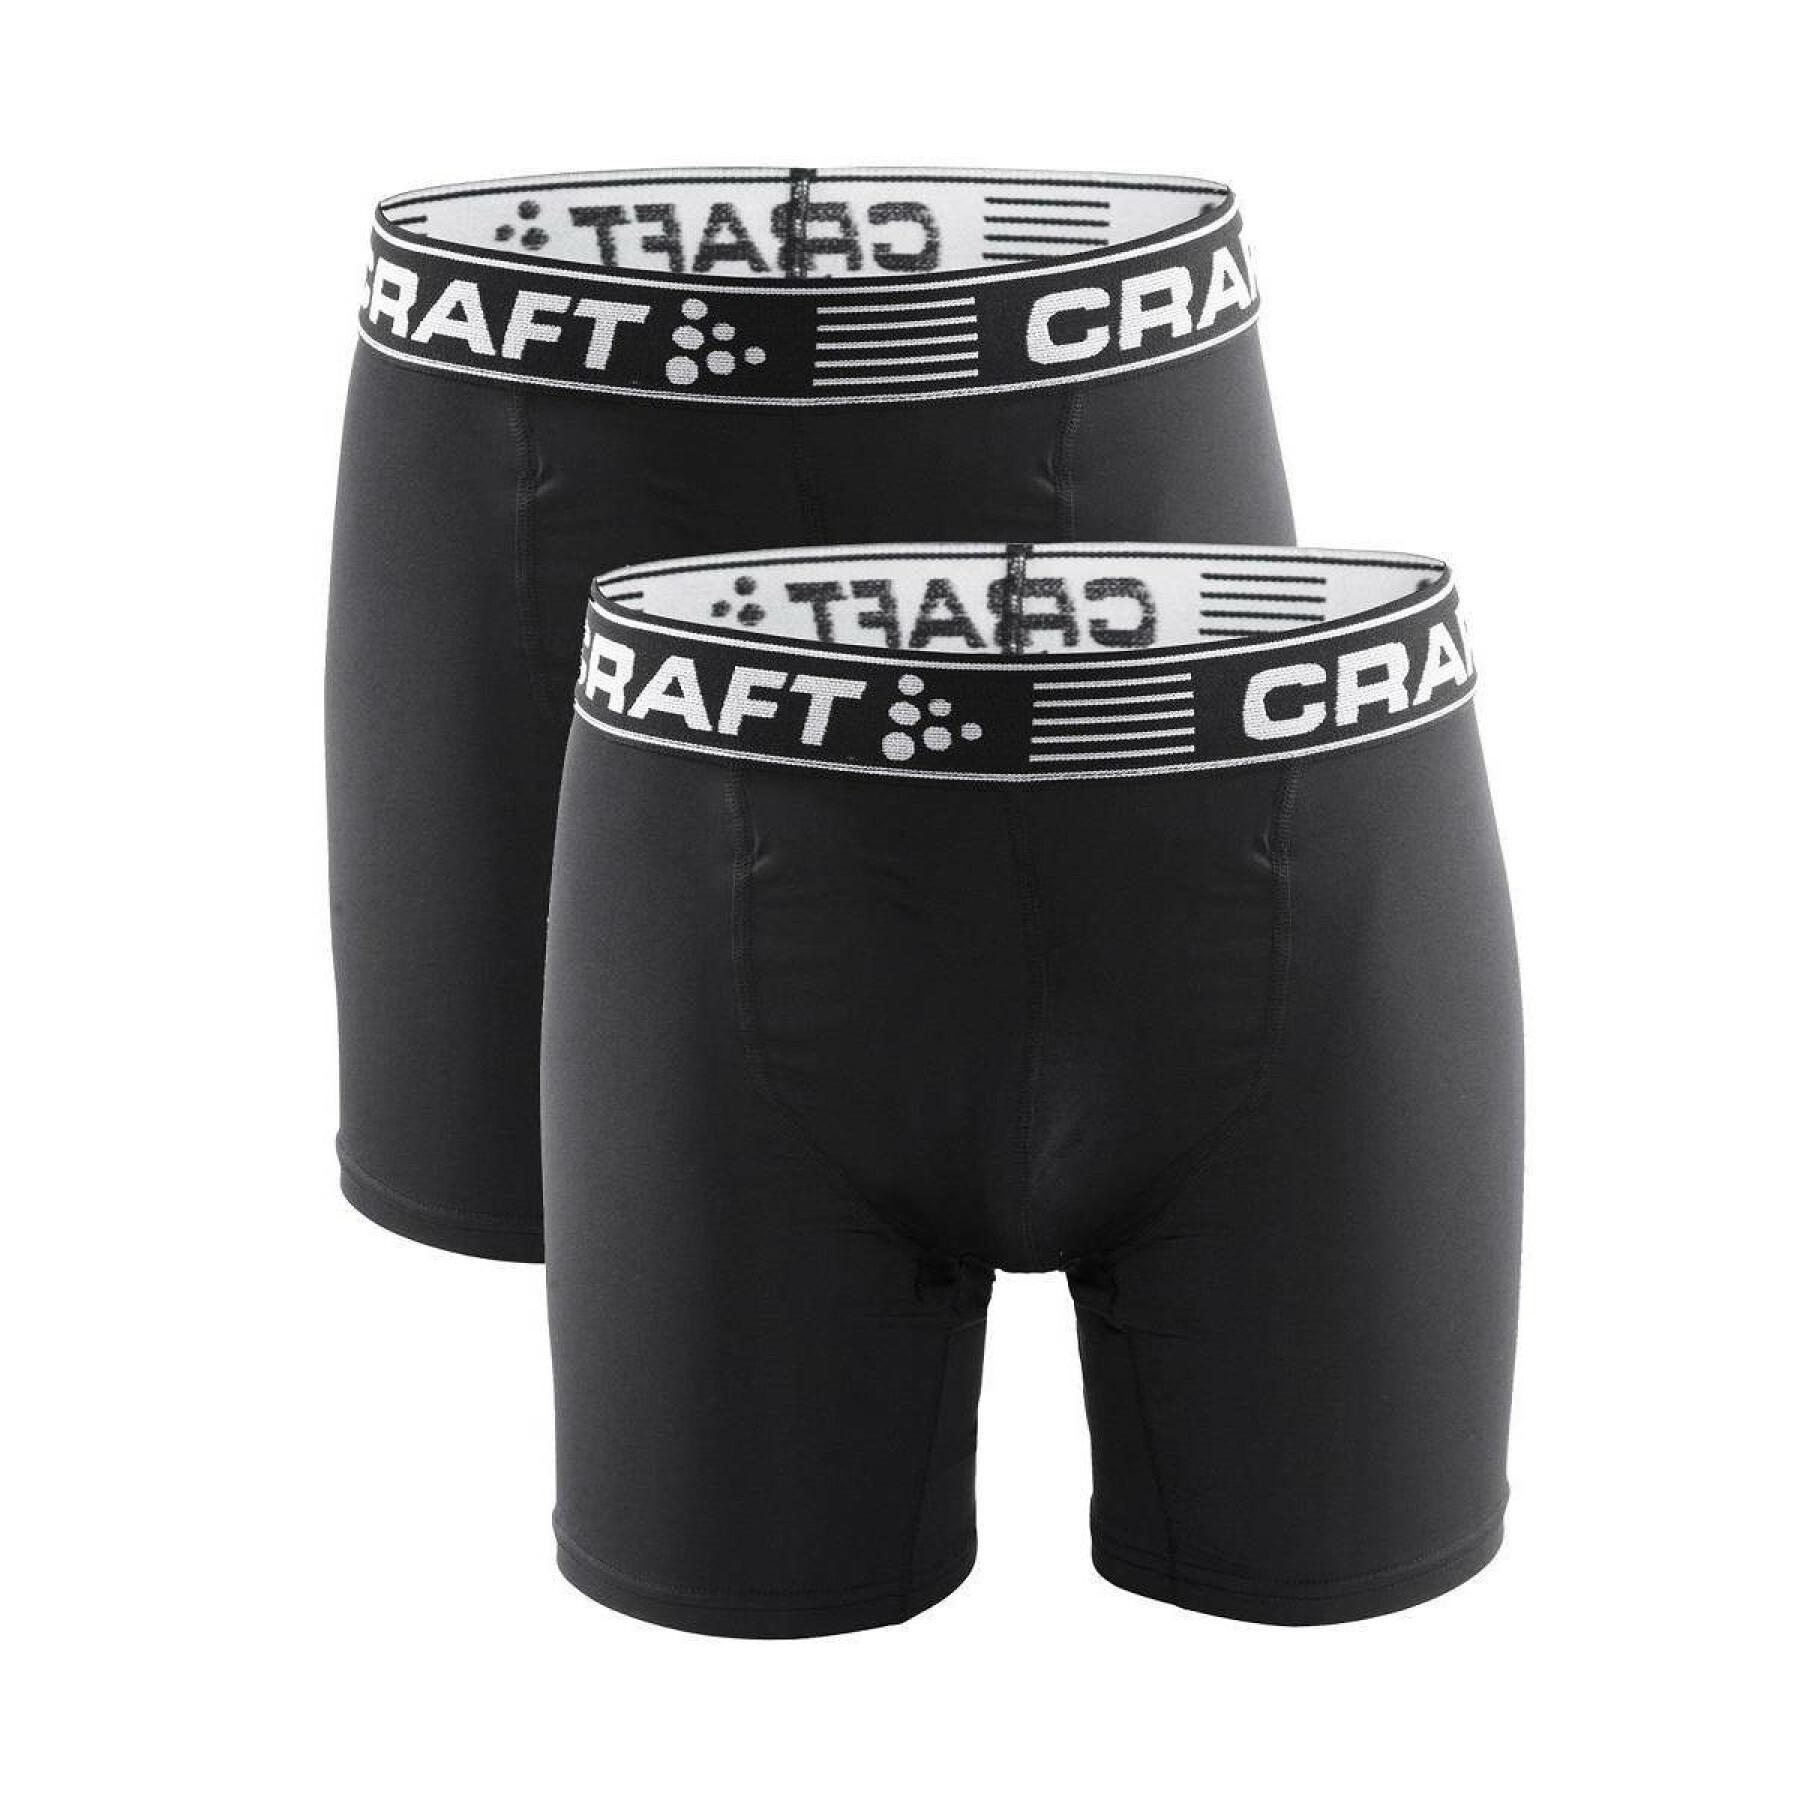 Pack of 2 6 inch boxers Craft greatness